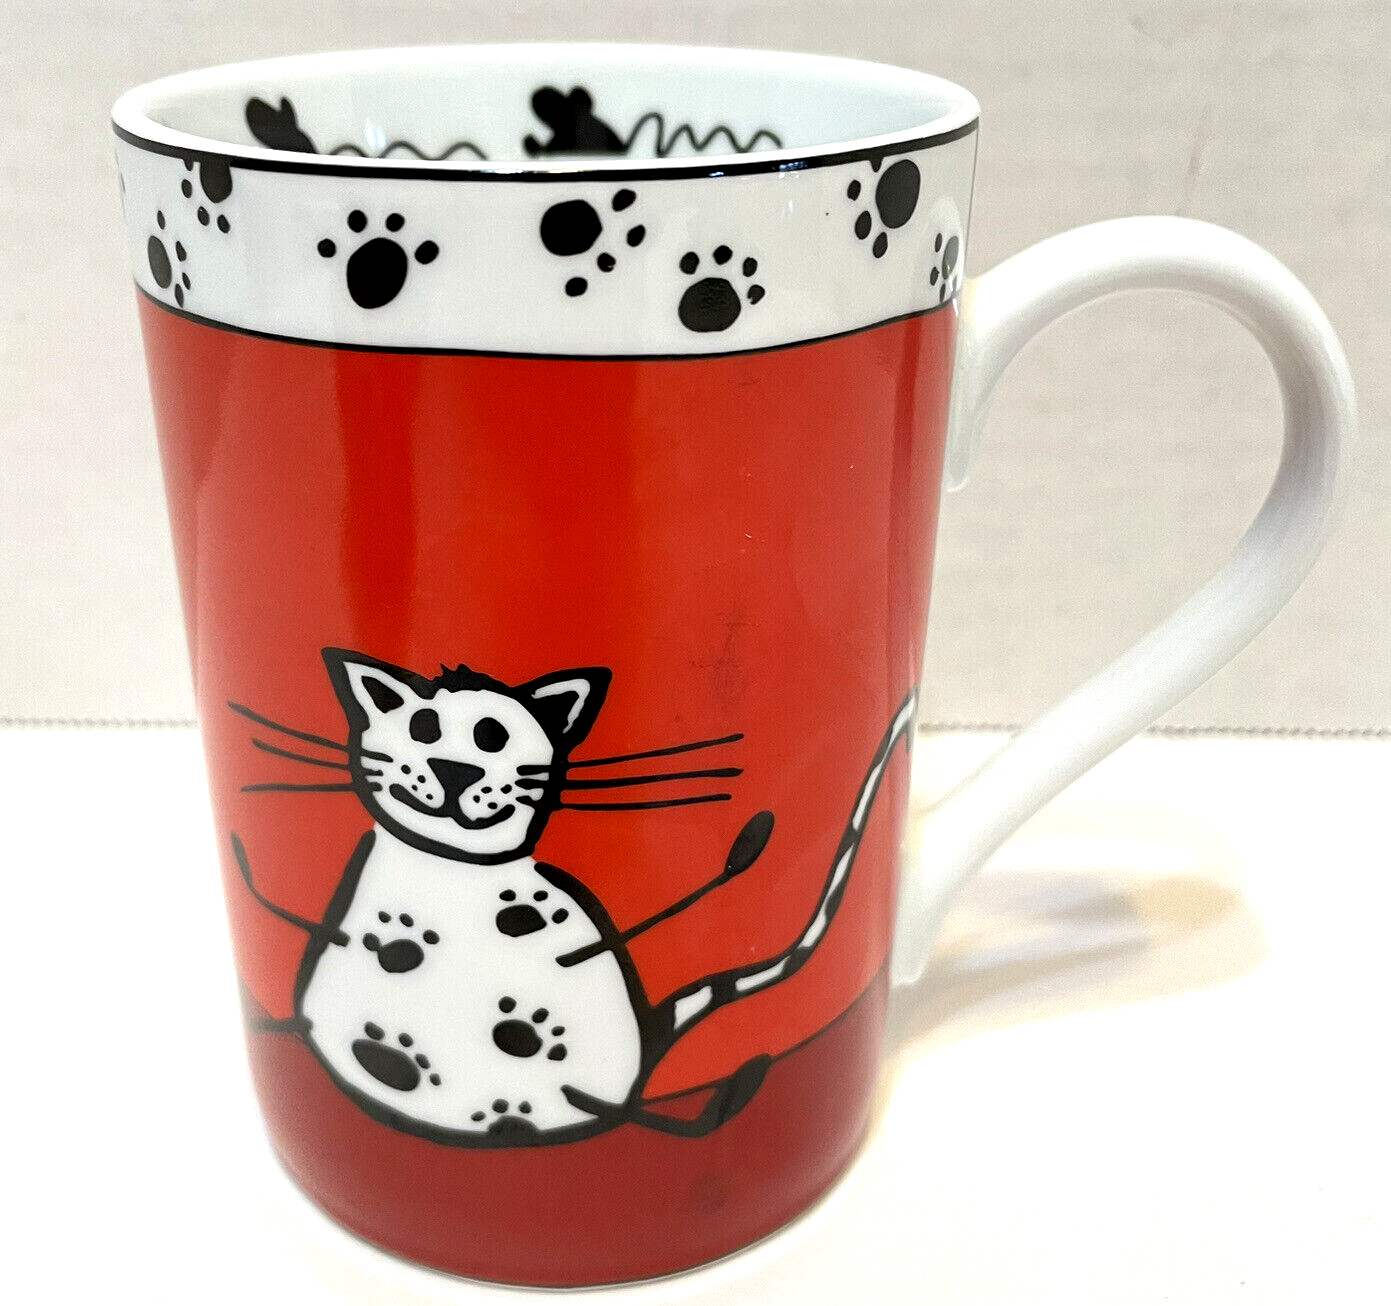 Primary image for Pier 1 Cat and Mouse Porcelain Coffee Tea Cup Mug Paw Prints Red Black White